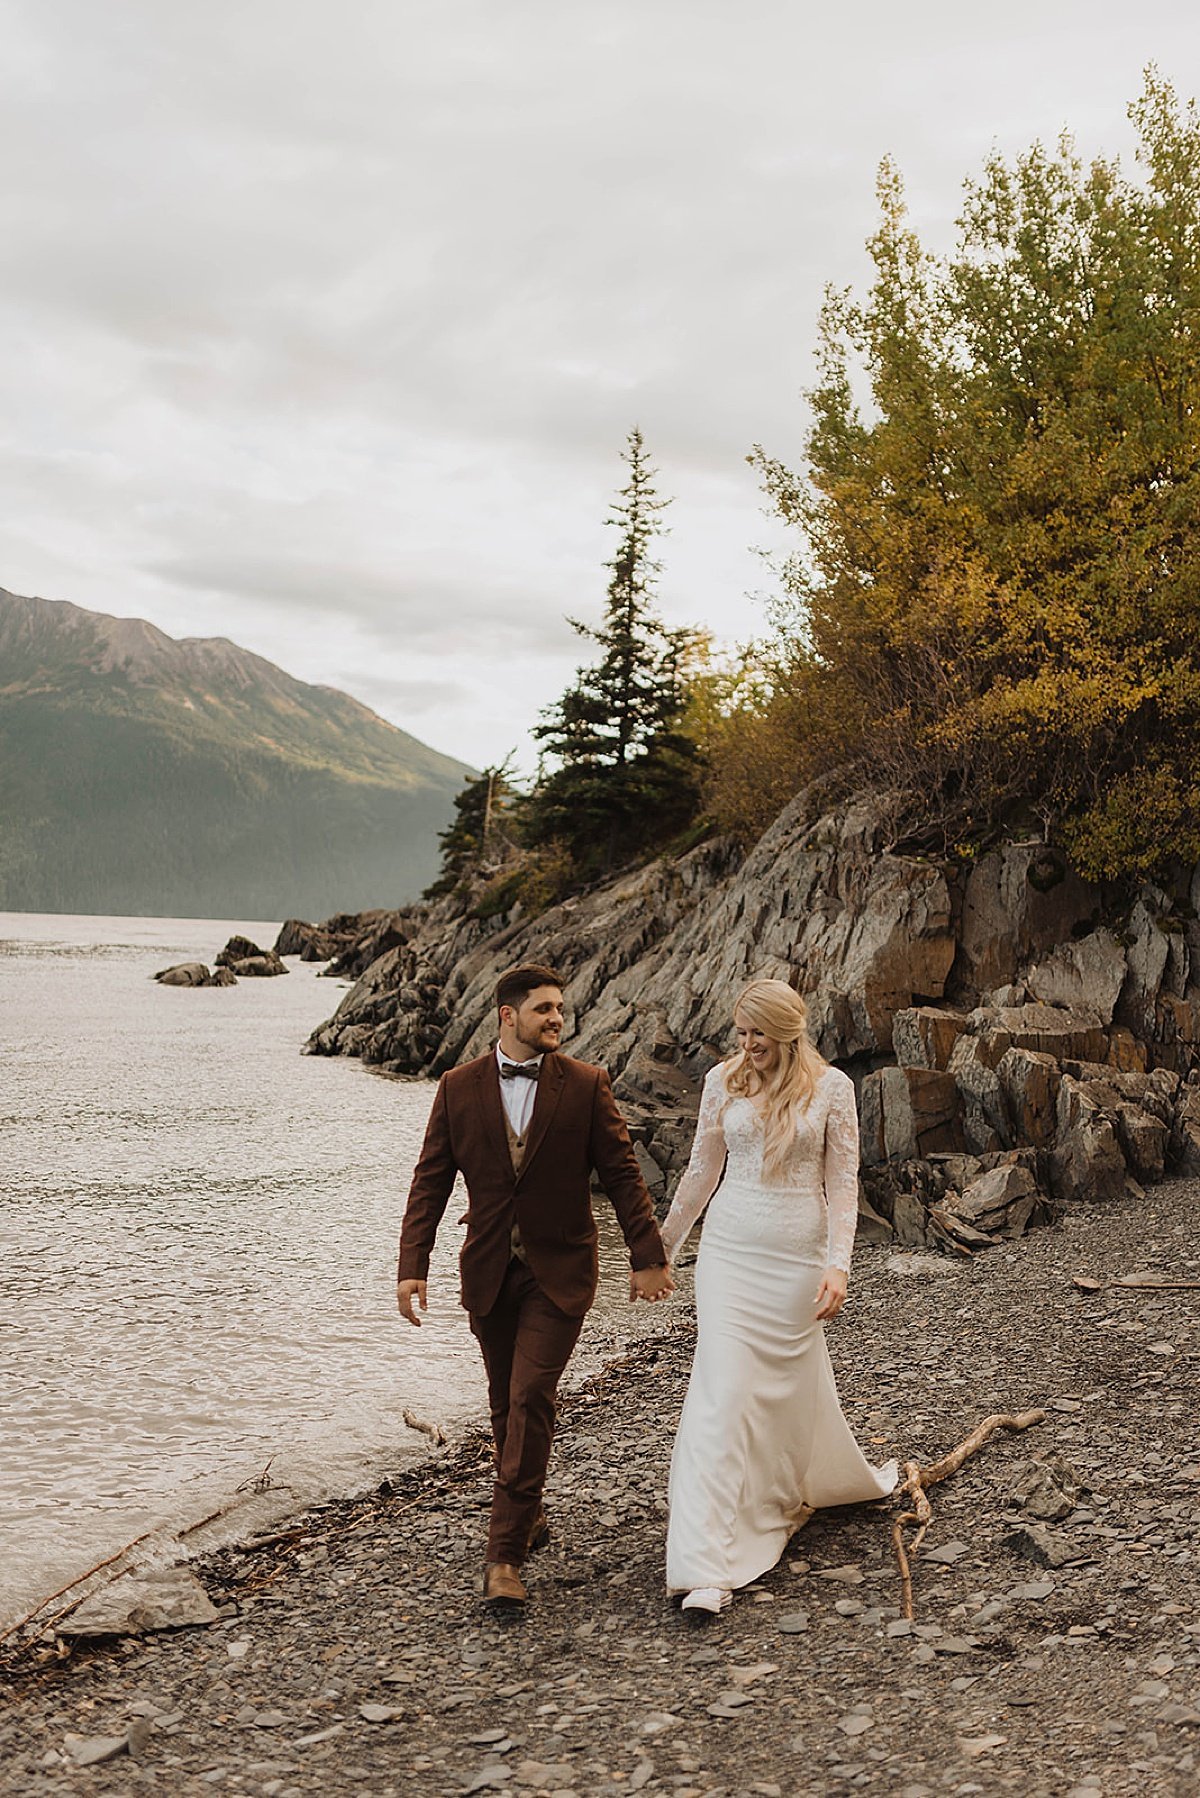  bride and groom take a post-ceremony stroll on rocky, mountain lake beach at alaska wedding shot by Theresa mcdonald photography 